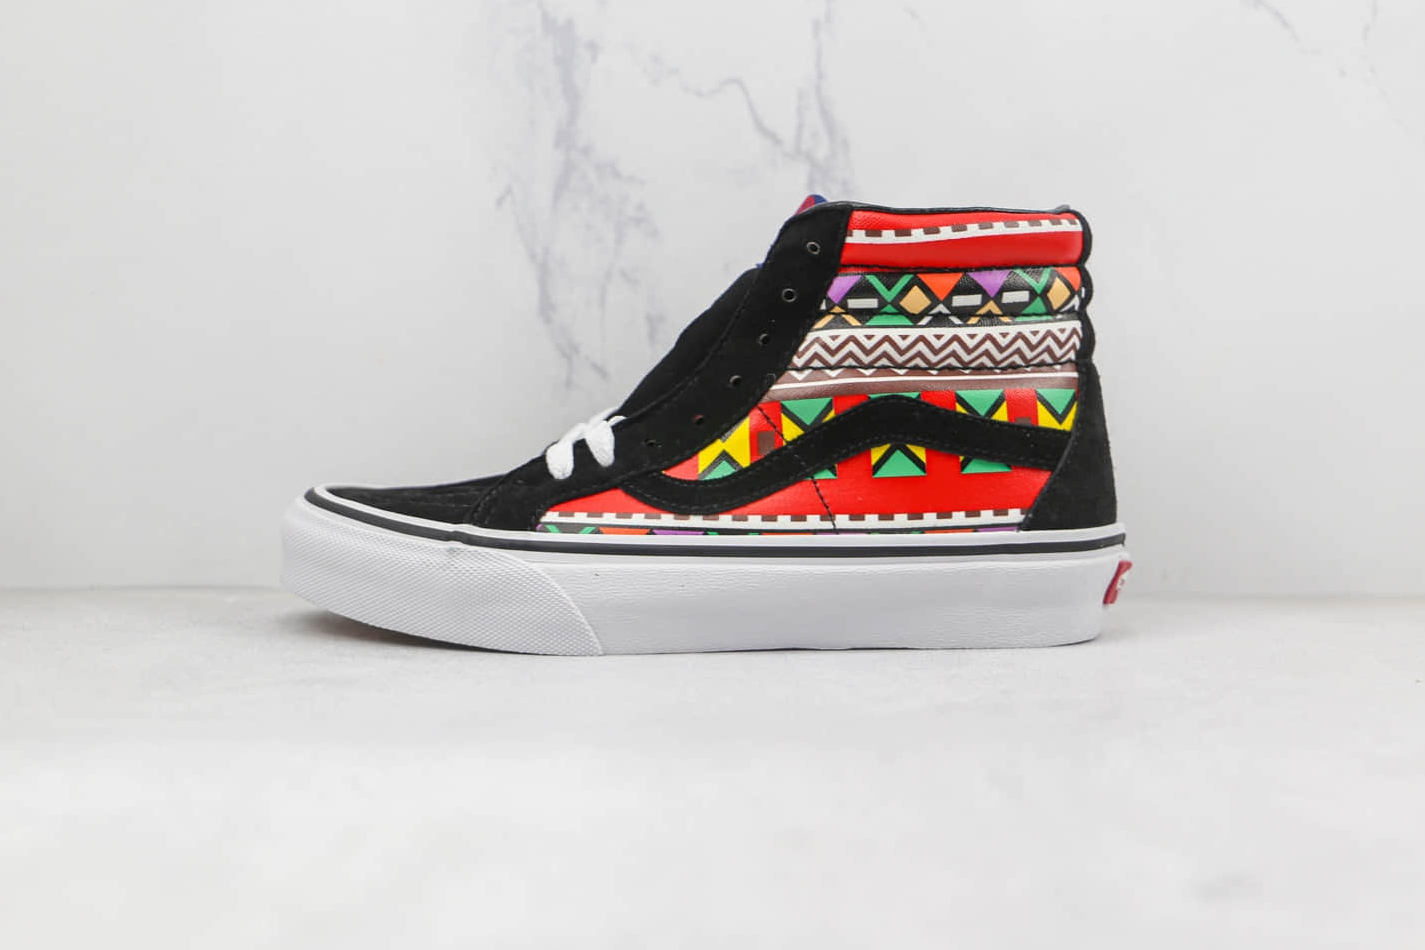 Shop the Trendiest Vans High Sk8-Hi Shoes for Ultimate Style | Free Shipping Offer!